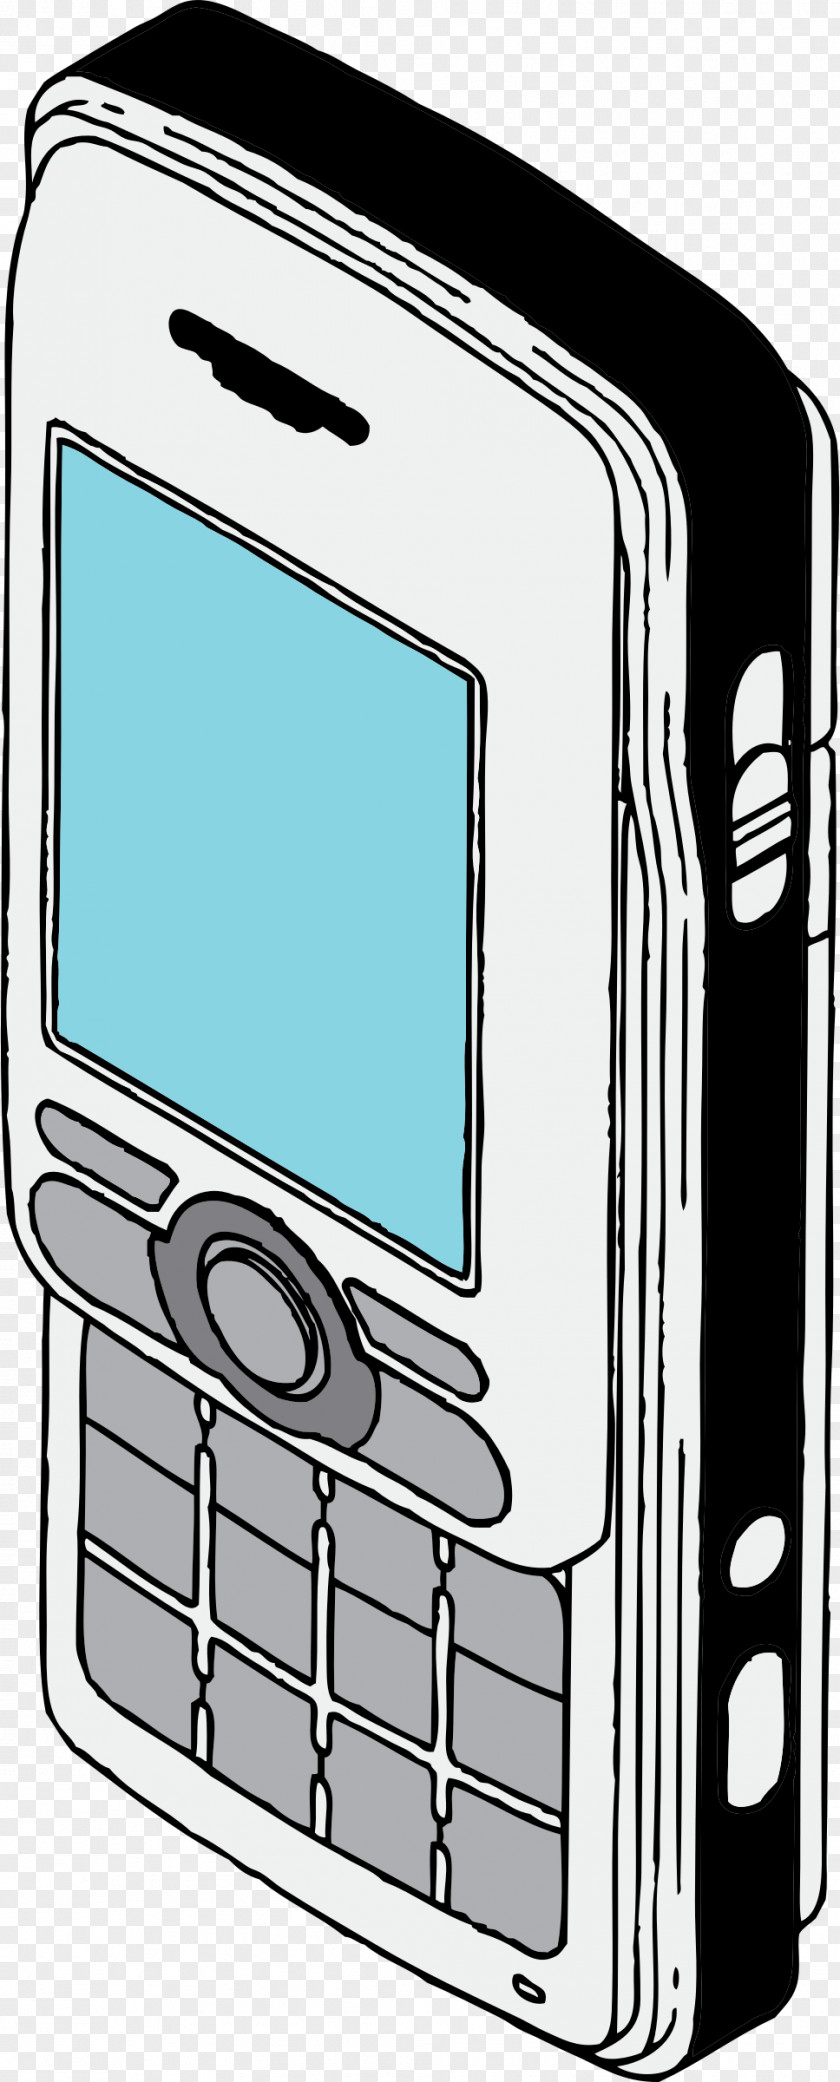 Cellphone IPhone Coloring Book Telephone Clip Art PNG